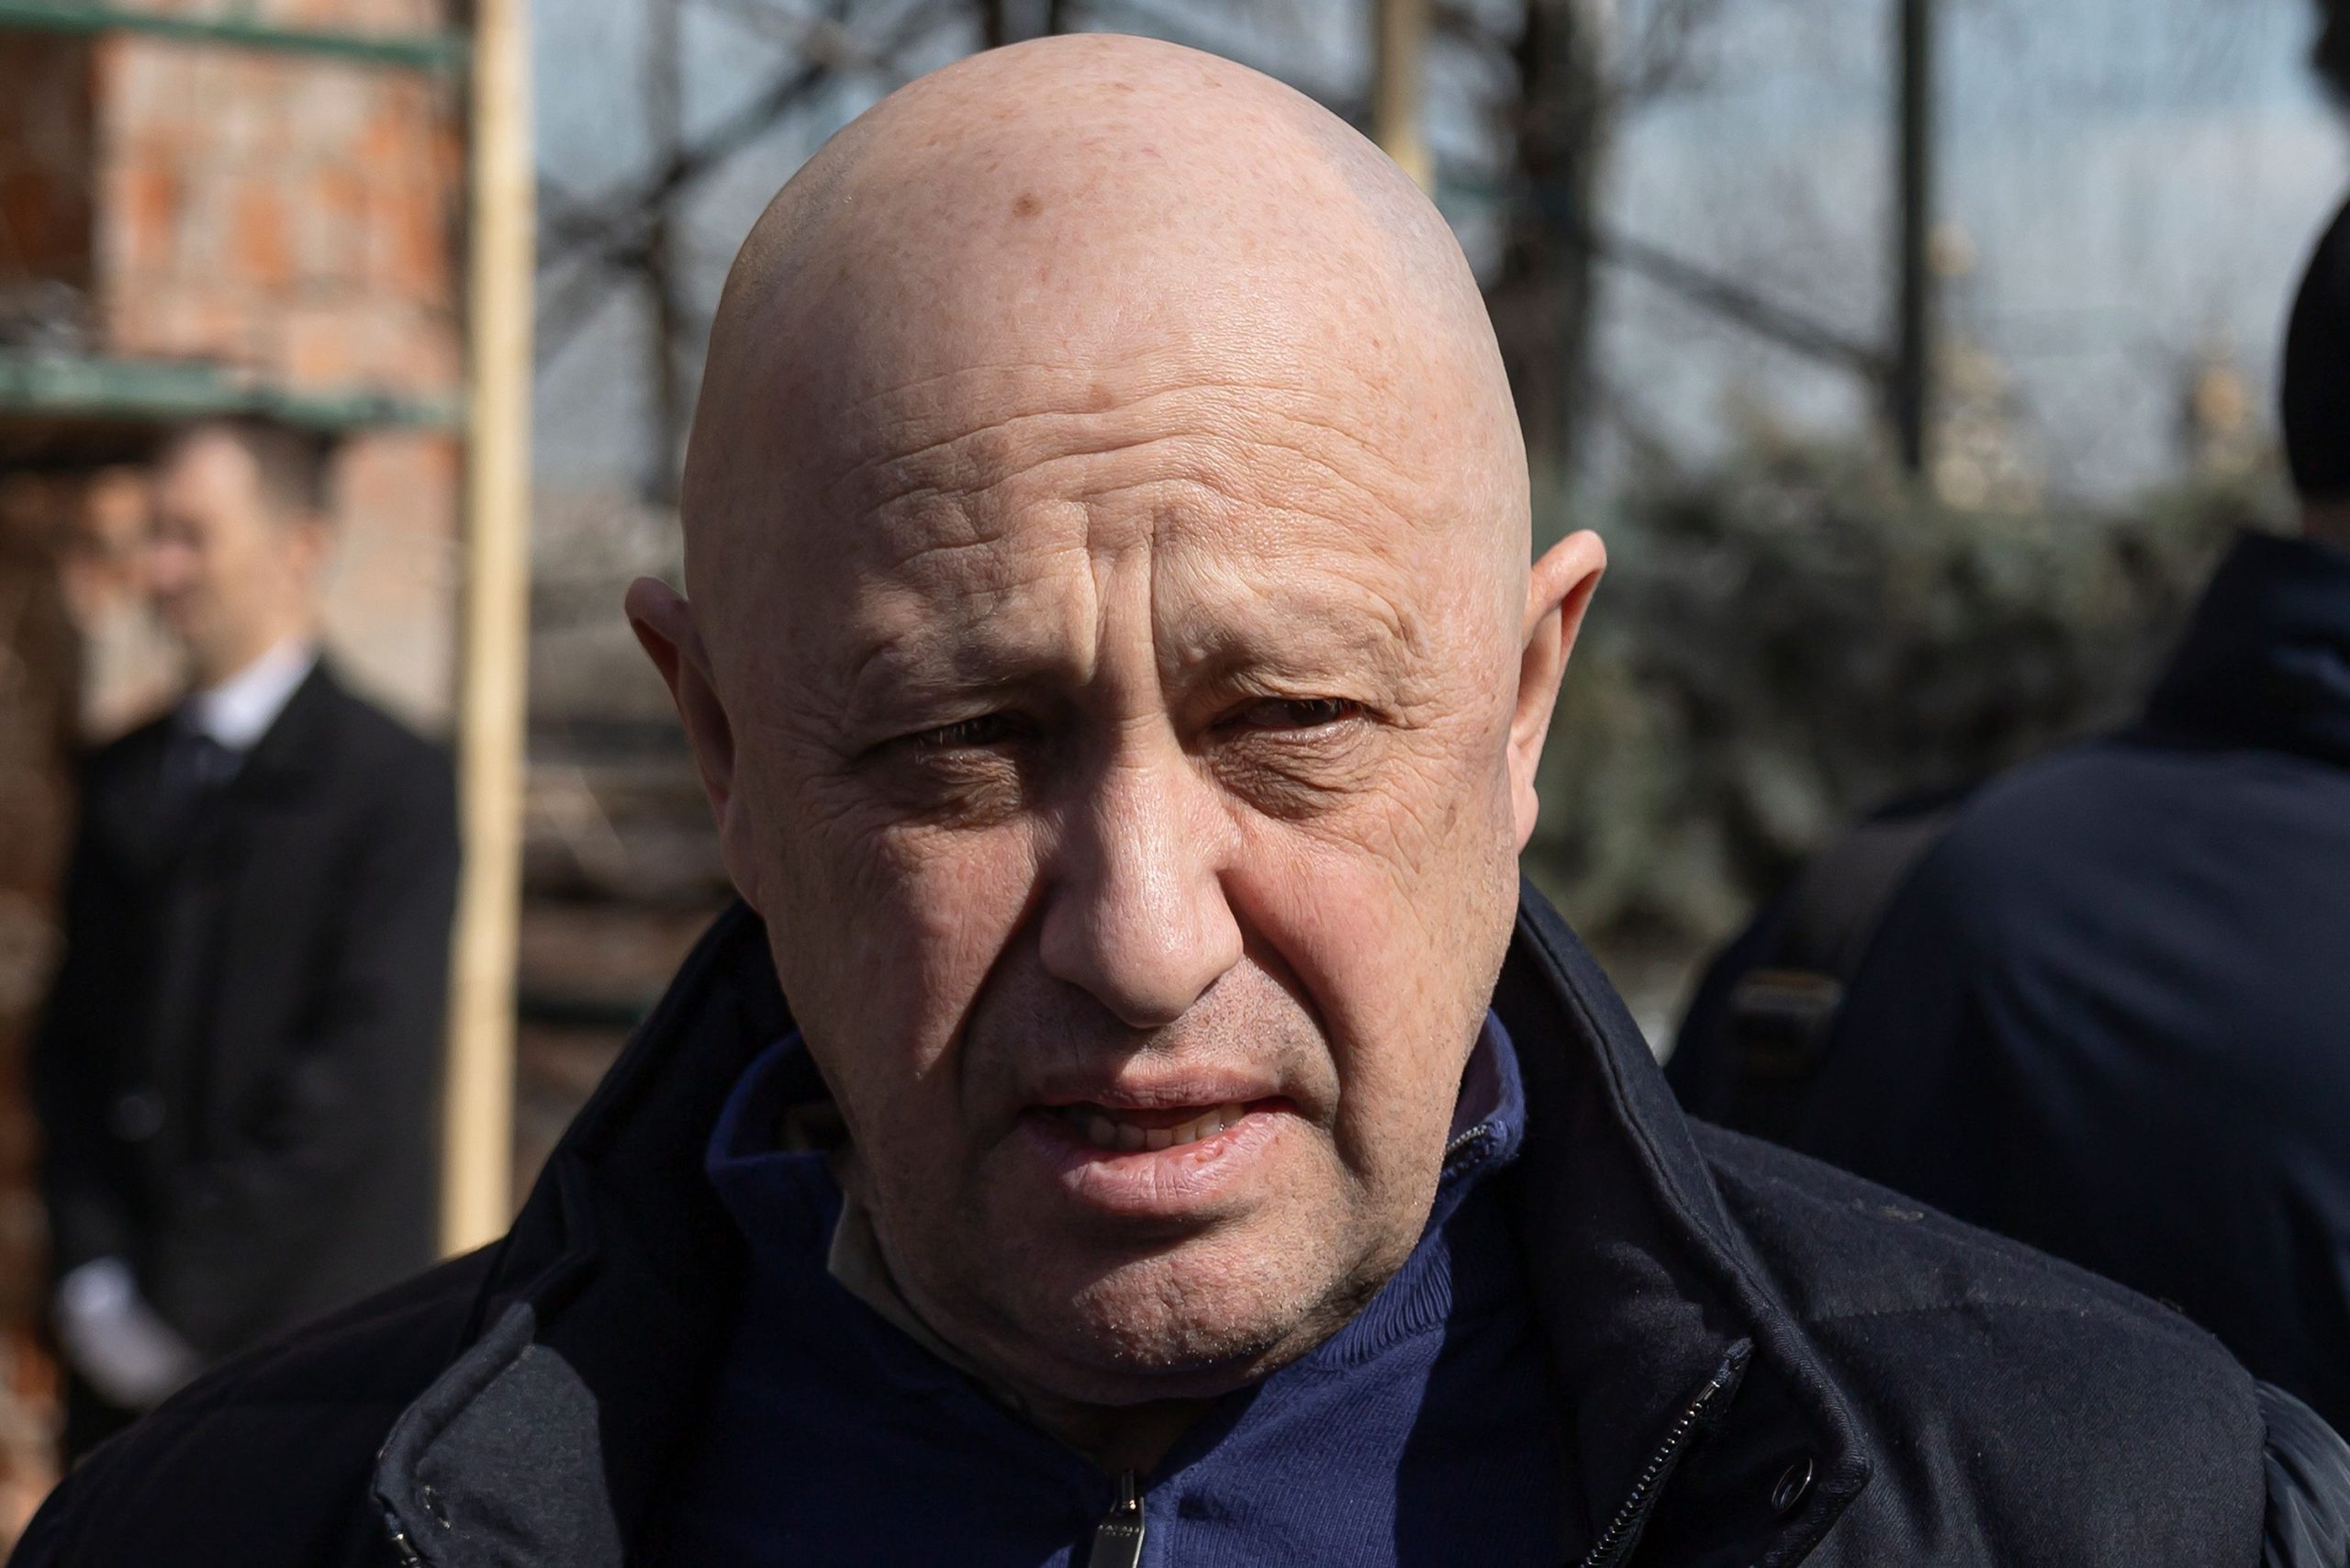 ‘Wagner Leader Yevgeny Prigozhin Is Alive and Plotting his Revenge on Putin after Body Double Was Killed in Plane Assassination plot,’ Russian Analyst Claims 